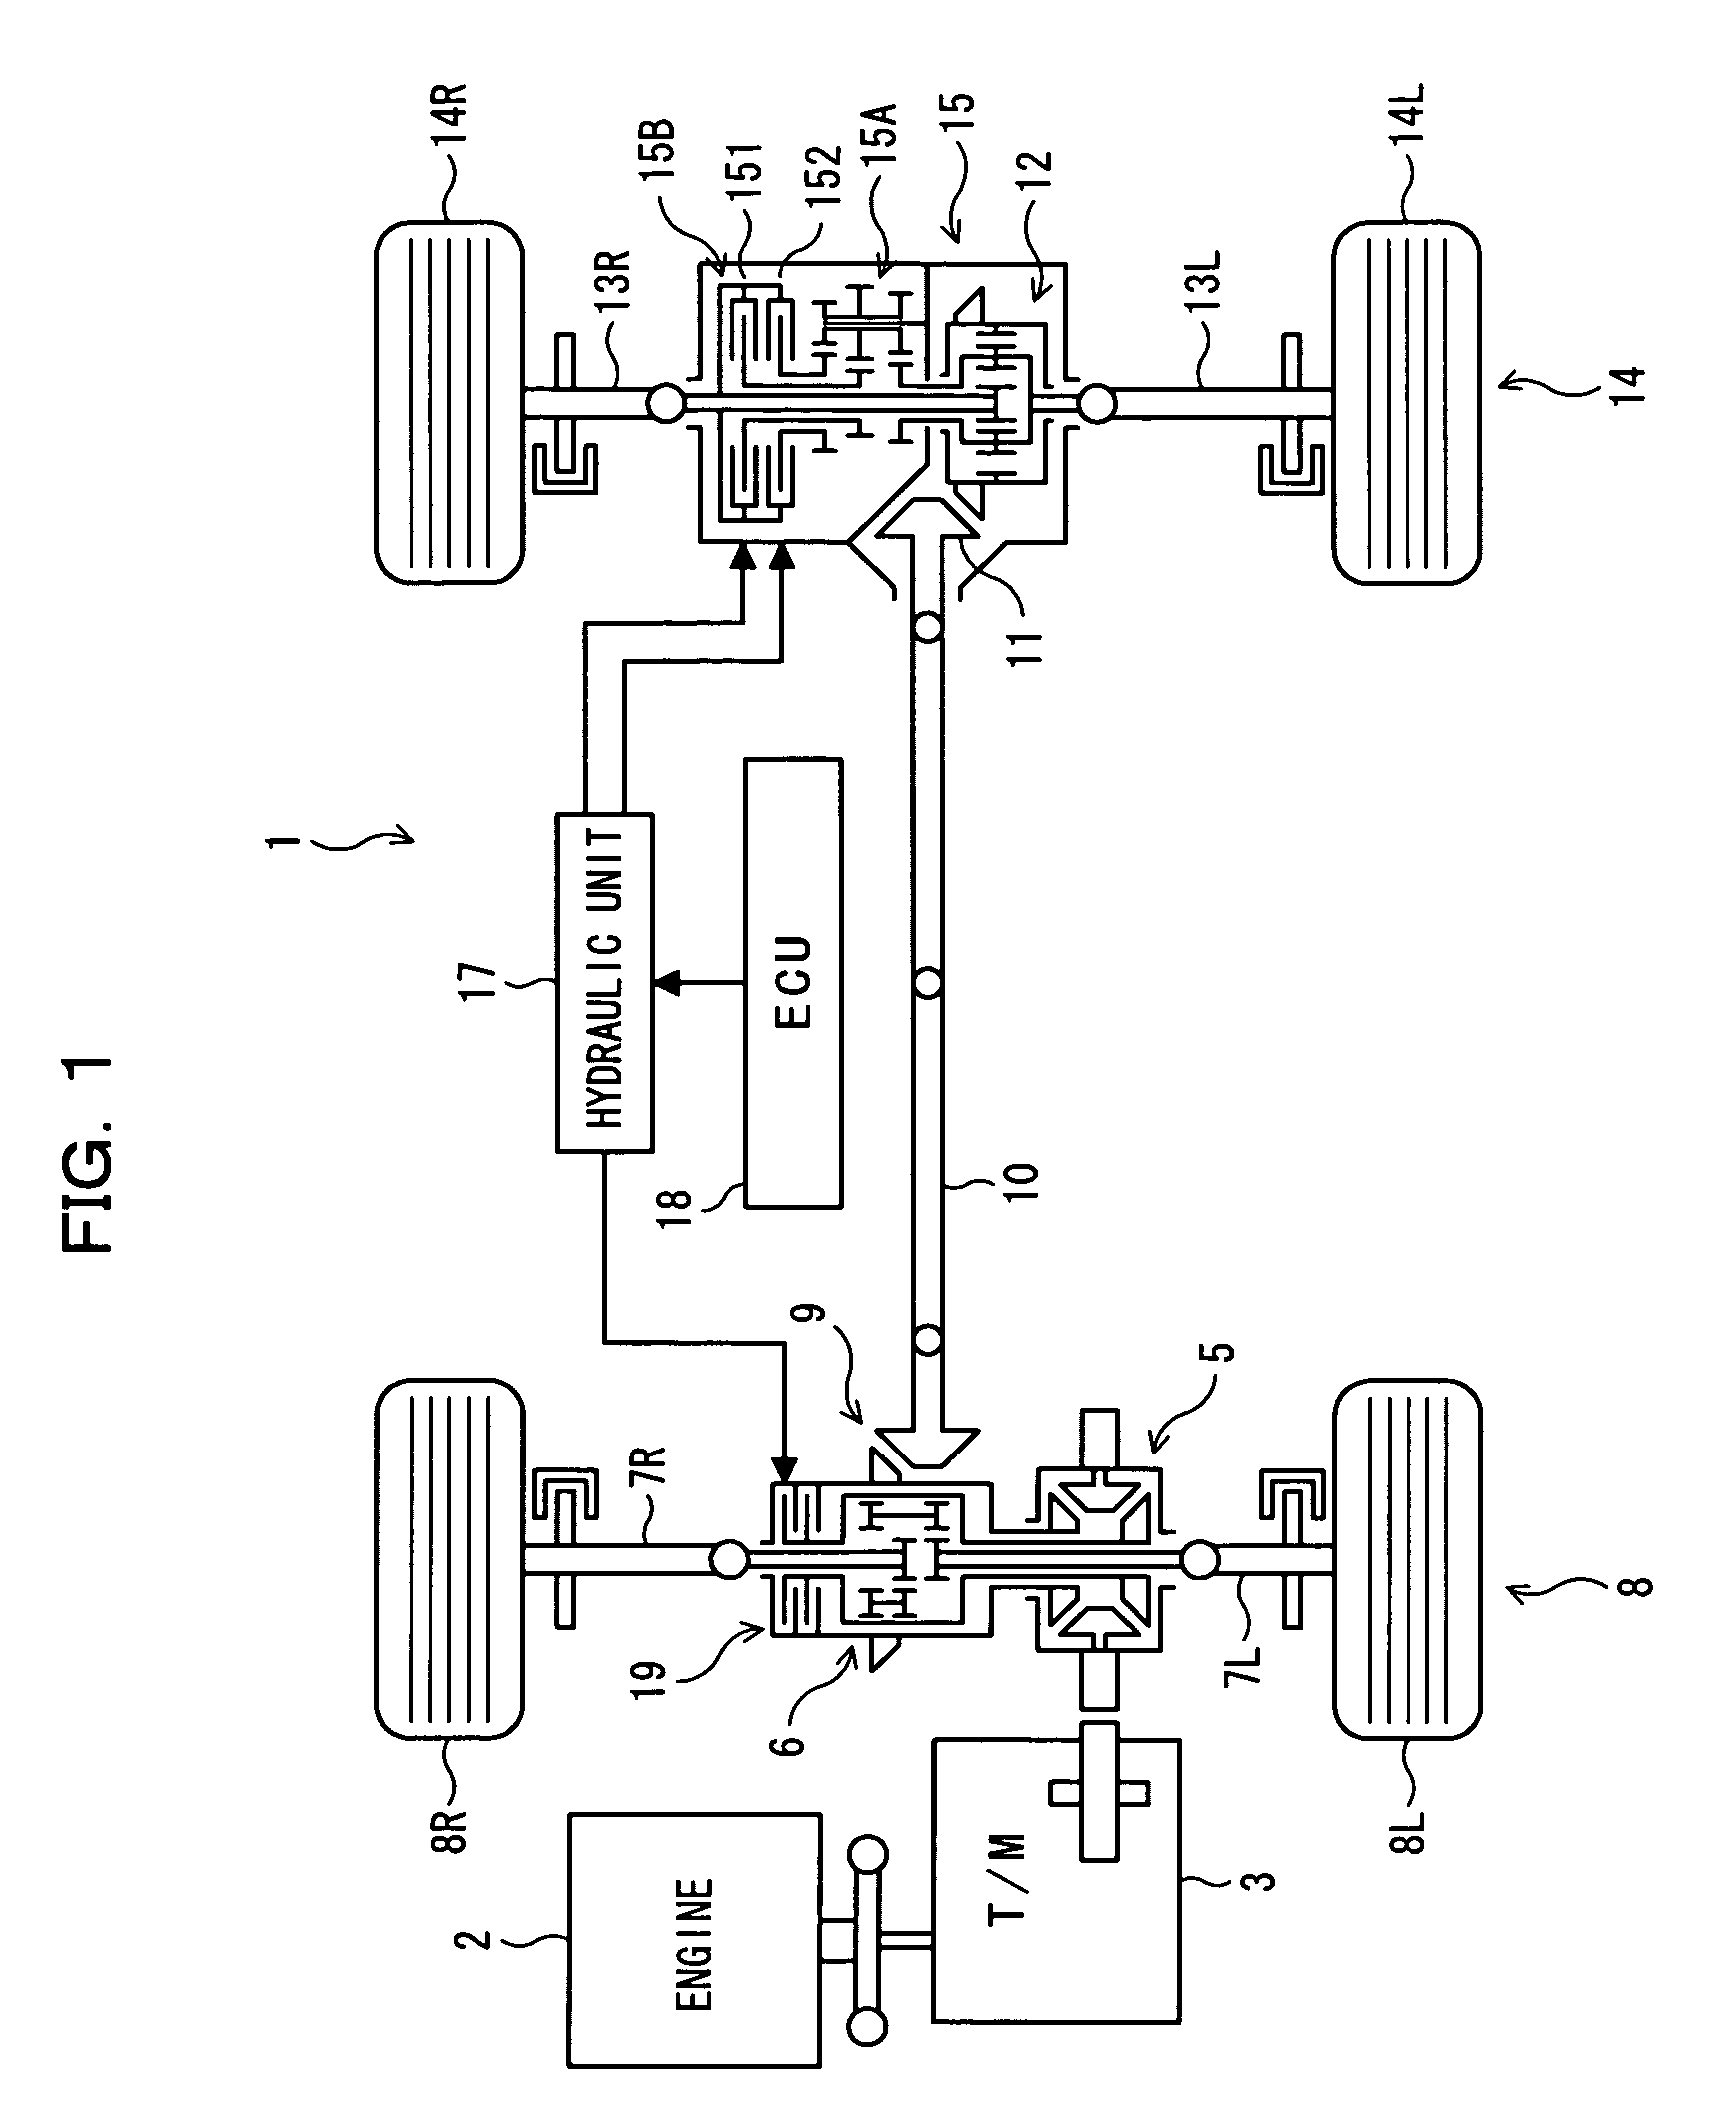 Apparatus and method for controlling driving force supplied to wheels on opposite sides of vehicle